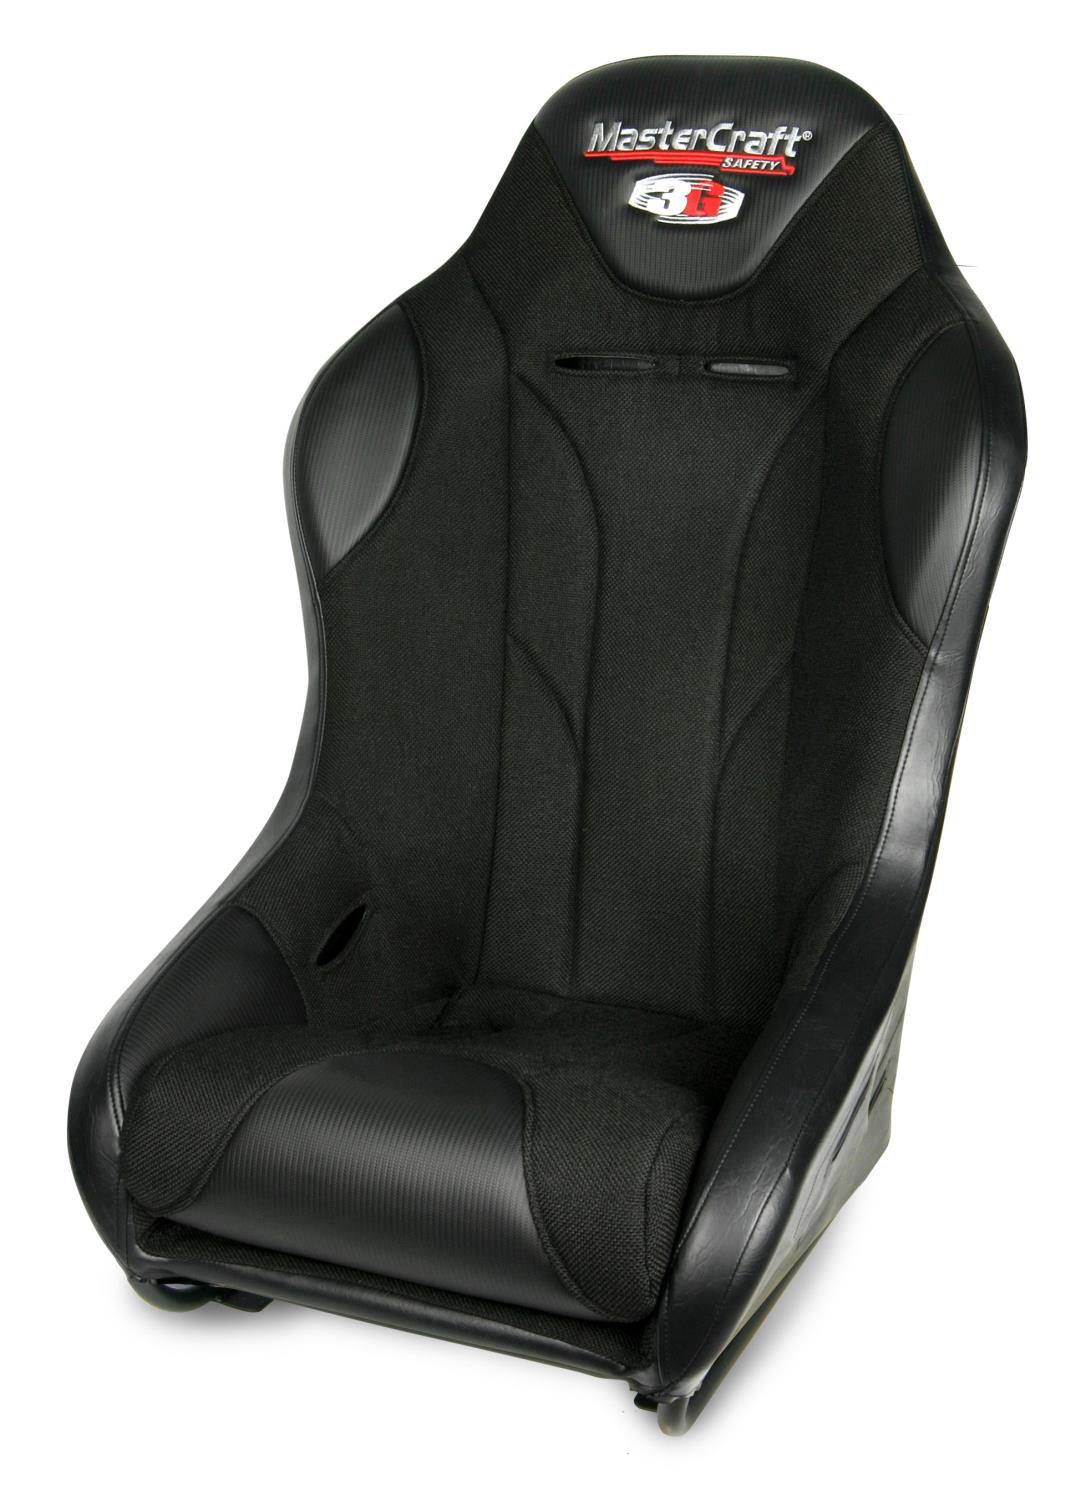 568024 1 in. WIDER 3G Seat w/DirtSport Stitch Pattern, Black with Black Fabric Center and Side Panels, Black Band